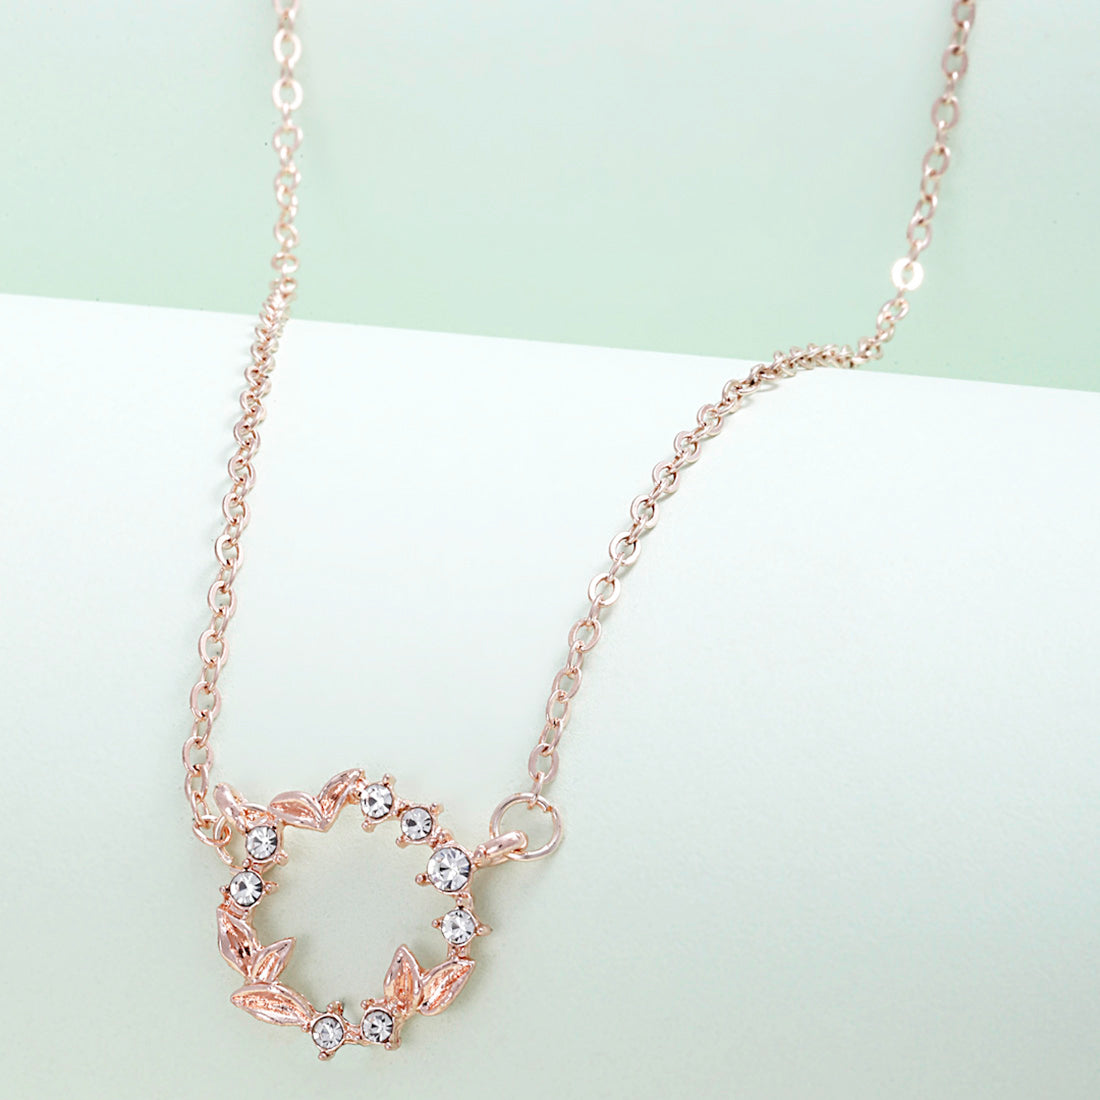 Delicate Rose Gold Wreath Necklace